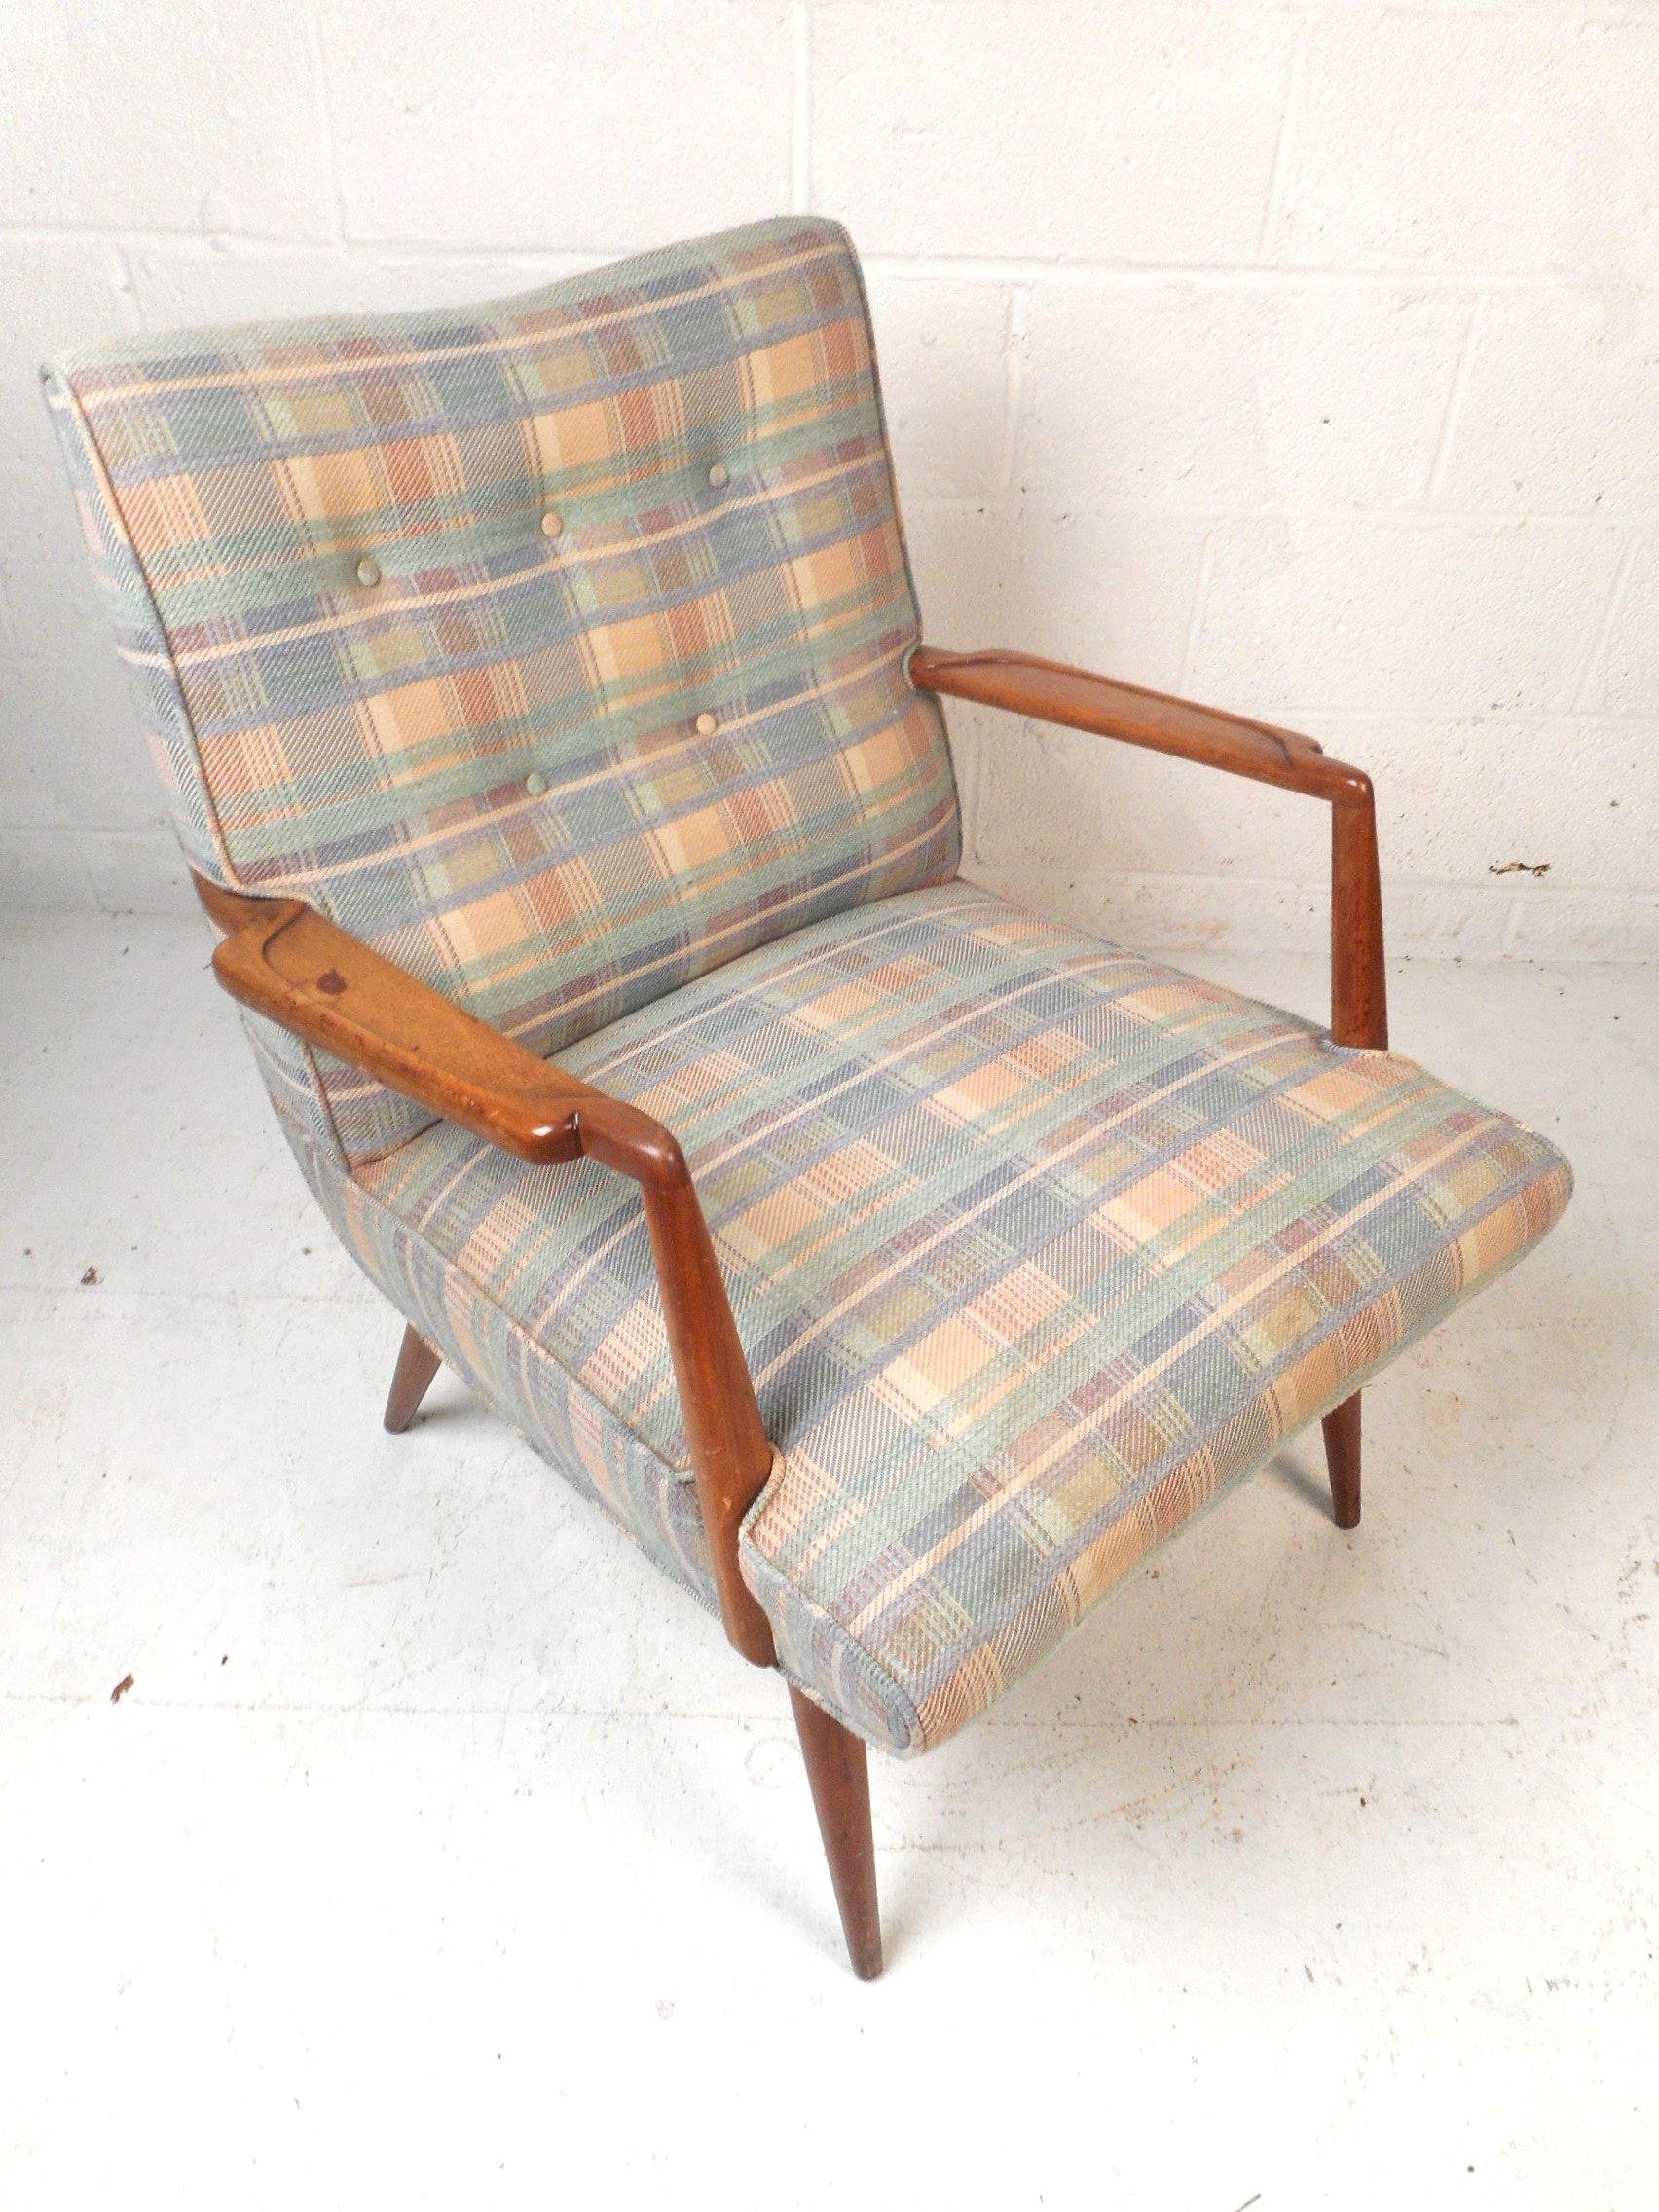 This stylish midcentury lounge chair features vintage plaid upholstery, a tufted backrest, a padded seat cushion ensuring comfort, a well-crafted walnut frame, and splayed back legs providing the chair with an interesting profile. Please confirm